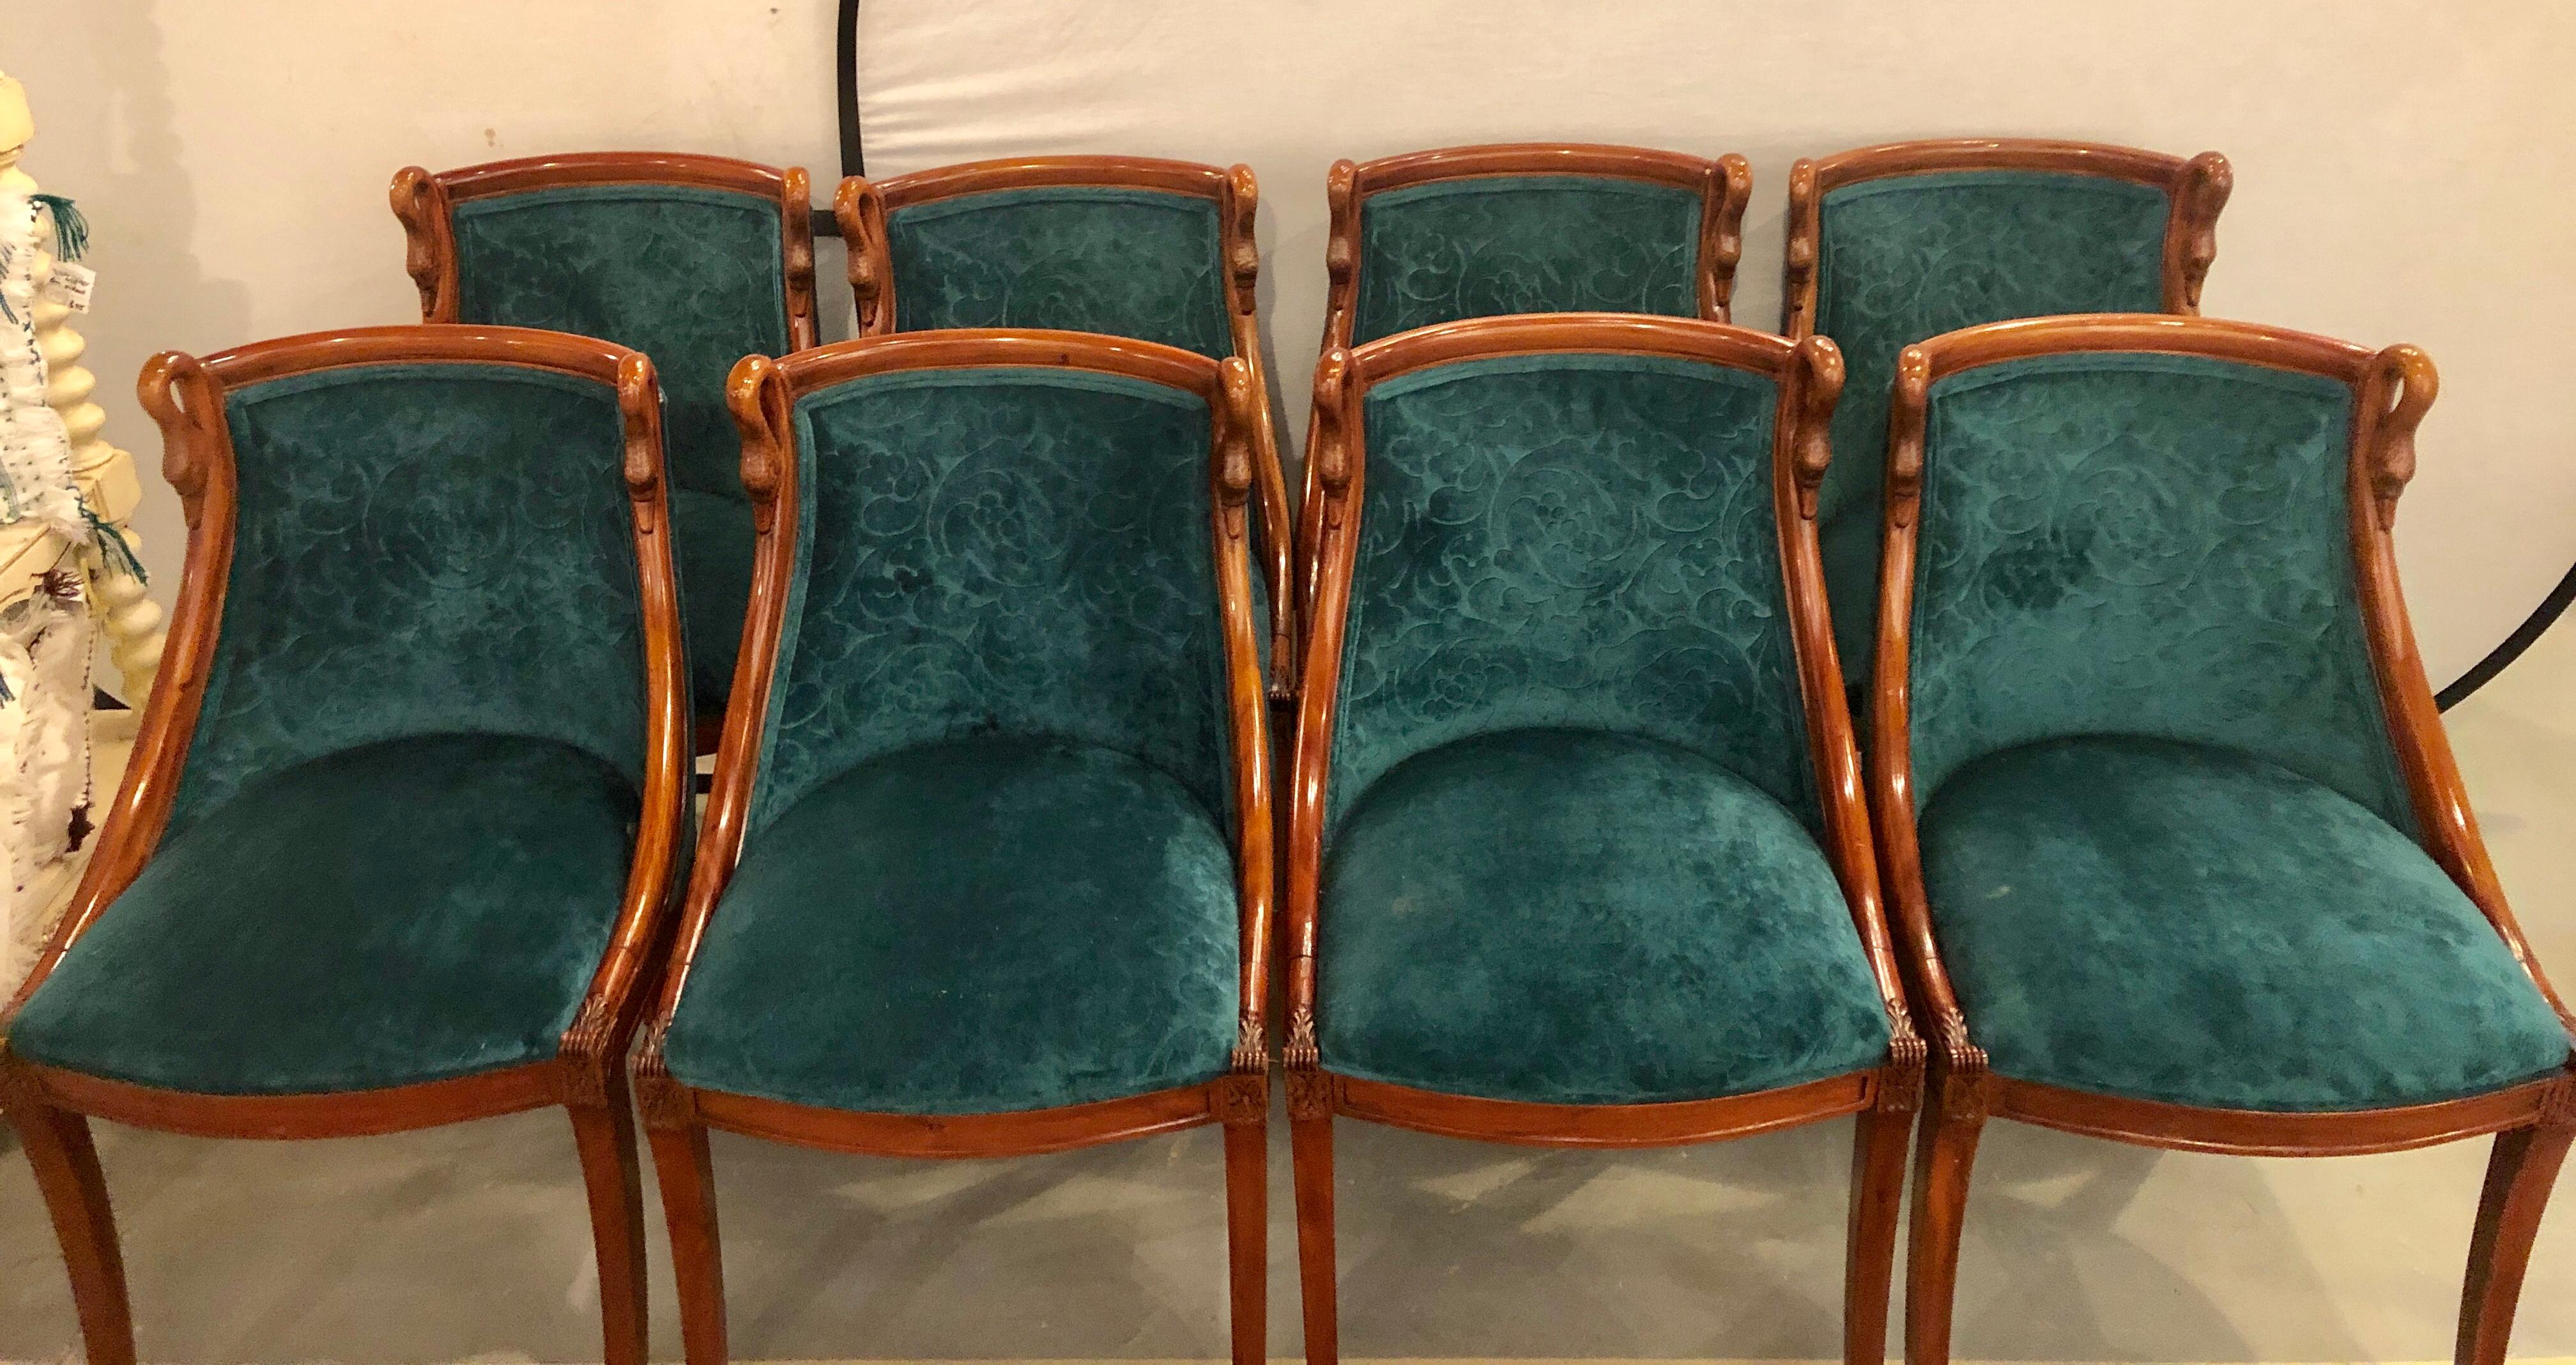 Set of eight Mid-Century Modern or Federal style dining side chairs. This is one of those versatile and easy to place sets of dining chairs that would gather in any room setting. The ability to sit in a modern or Mid-Century Modern setting as well